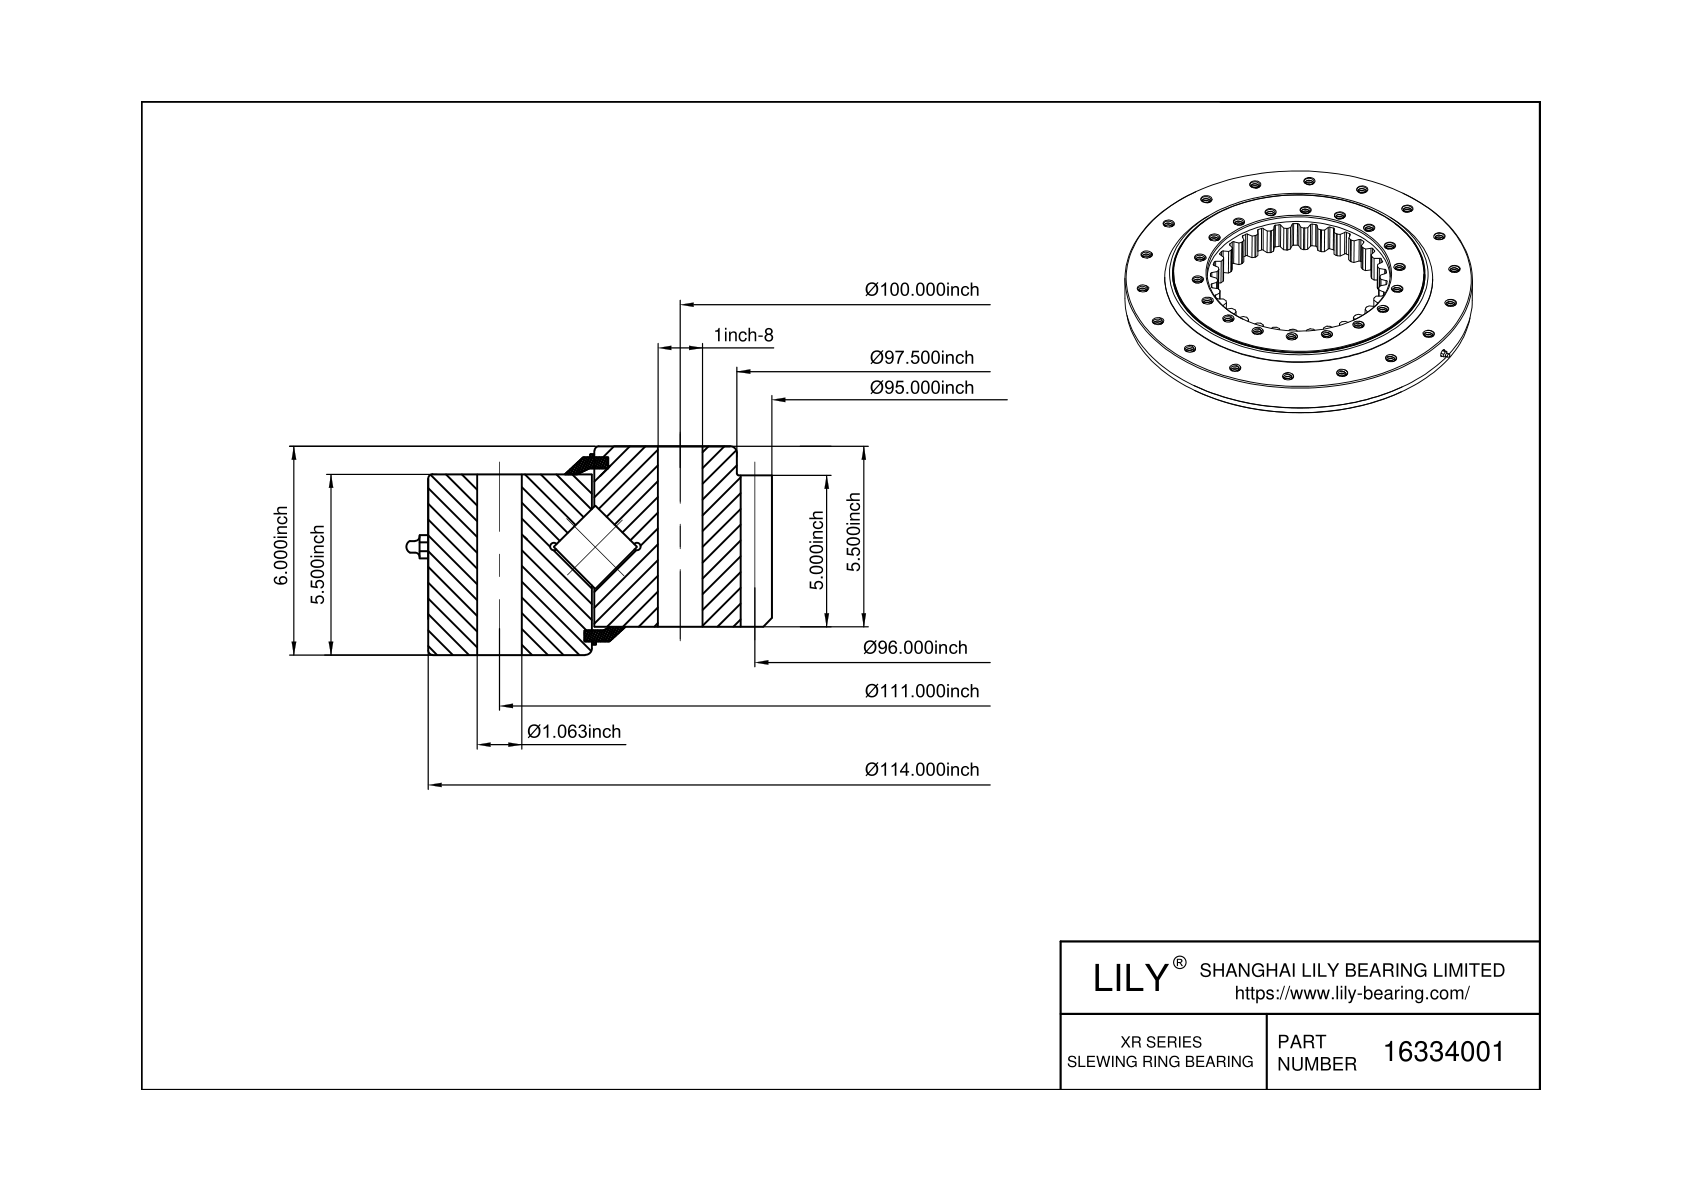 16334001 Cross Roller Slewing Ring Bearing cad drawing